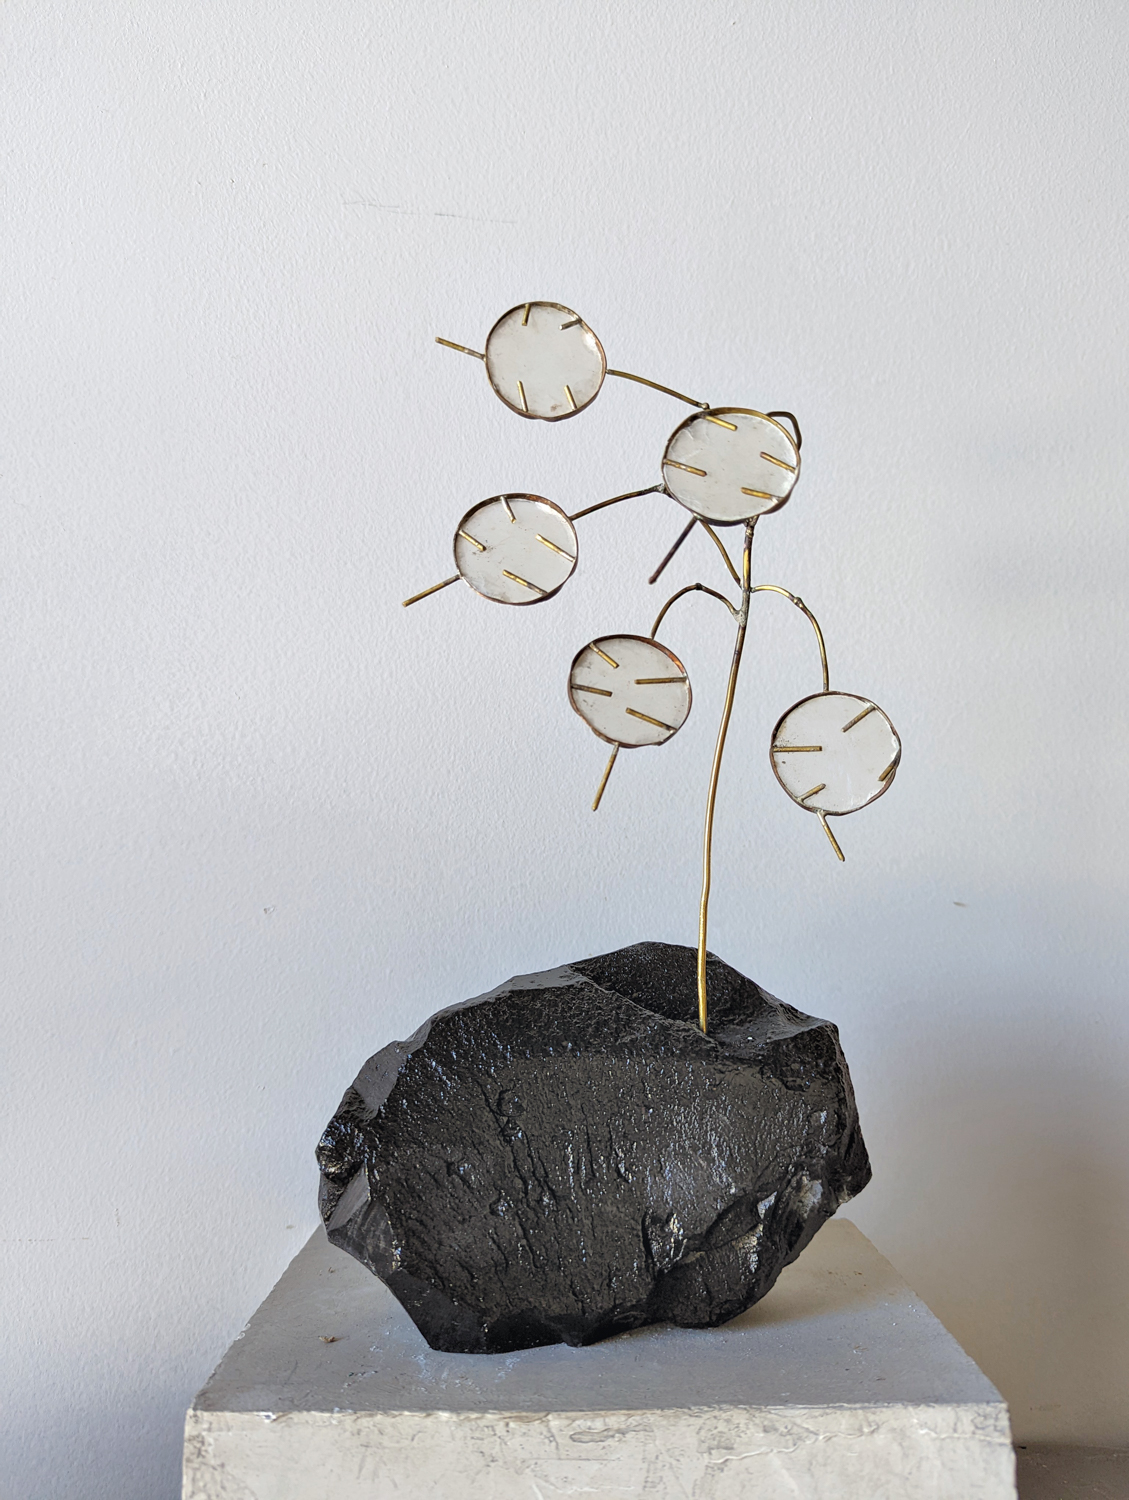 Floral-inspired sculpture made of capiz shells, brass and soapstone.